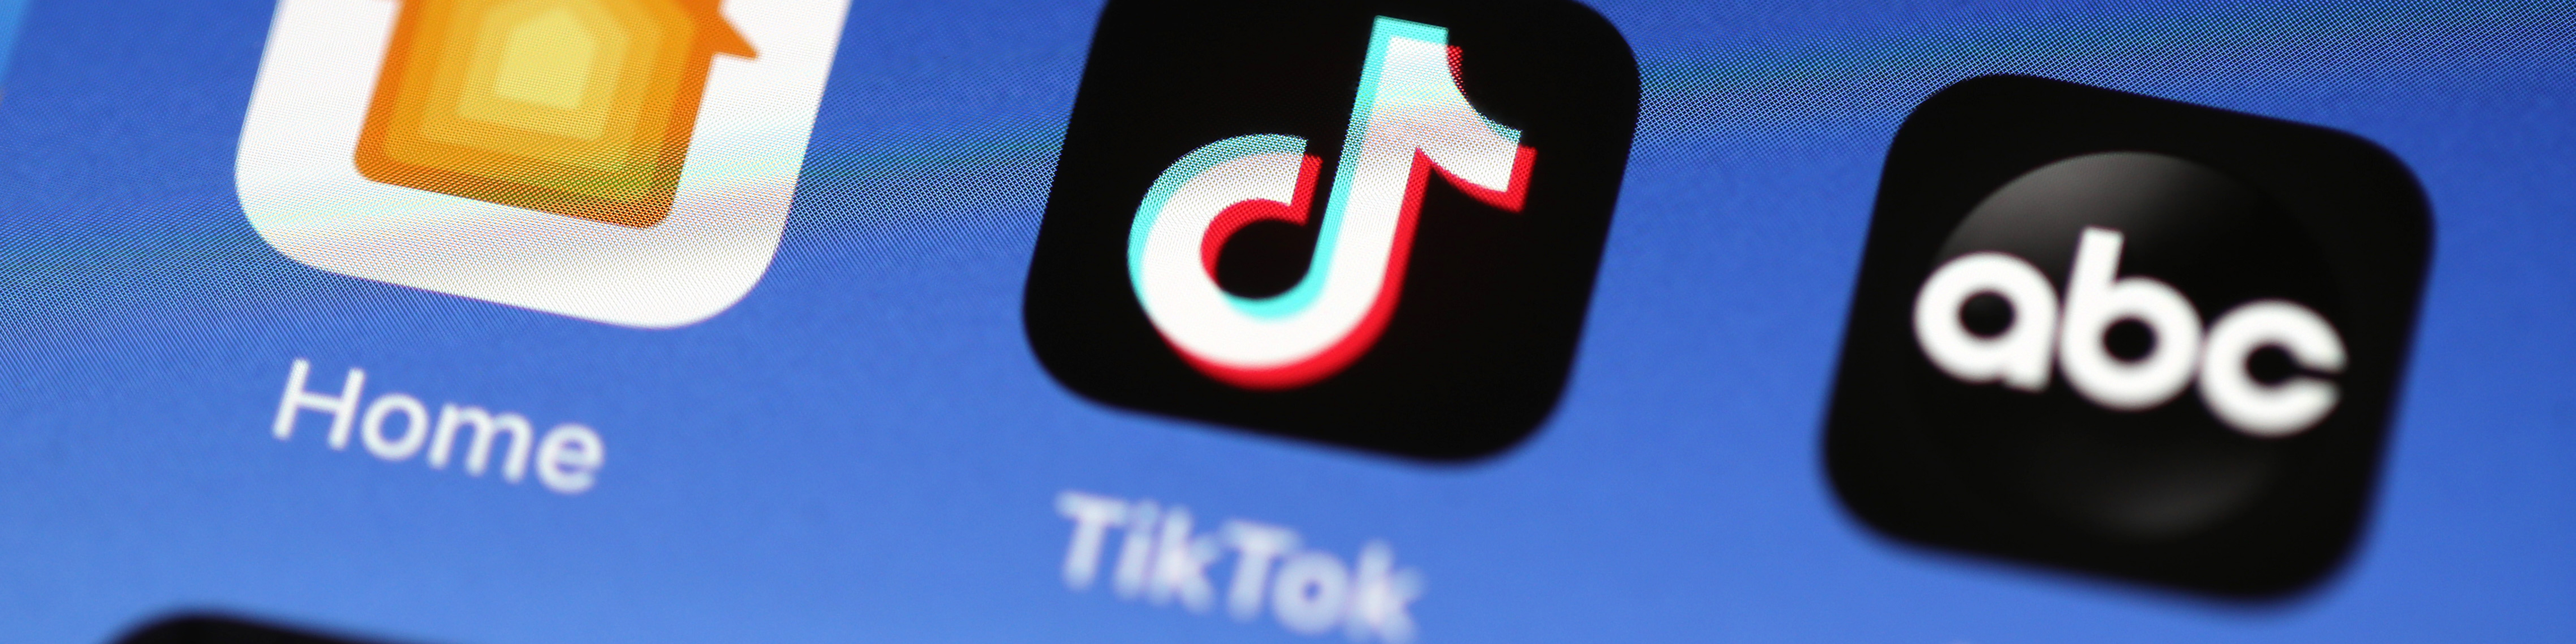 photo illustration showing the TikTok app is displayed on an Apple iPhone 